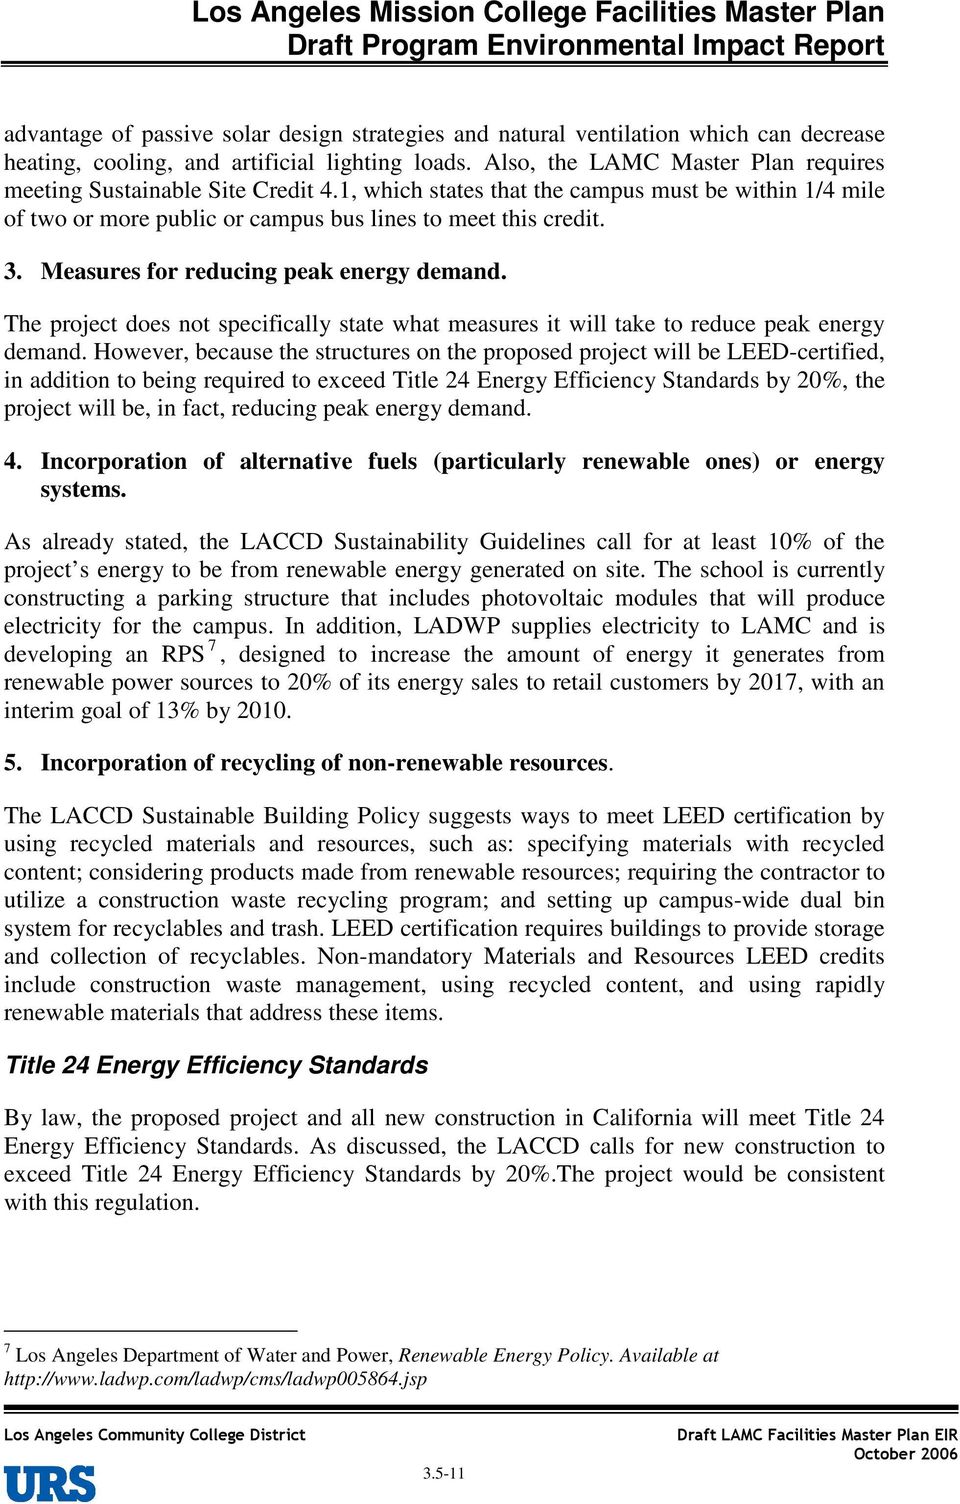 Measures for reducing peak energy demand. The project does not specifically state what measures it will take to reduce peak energy demand.